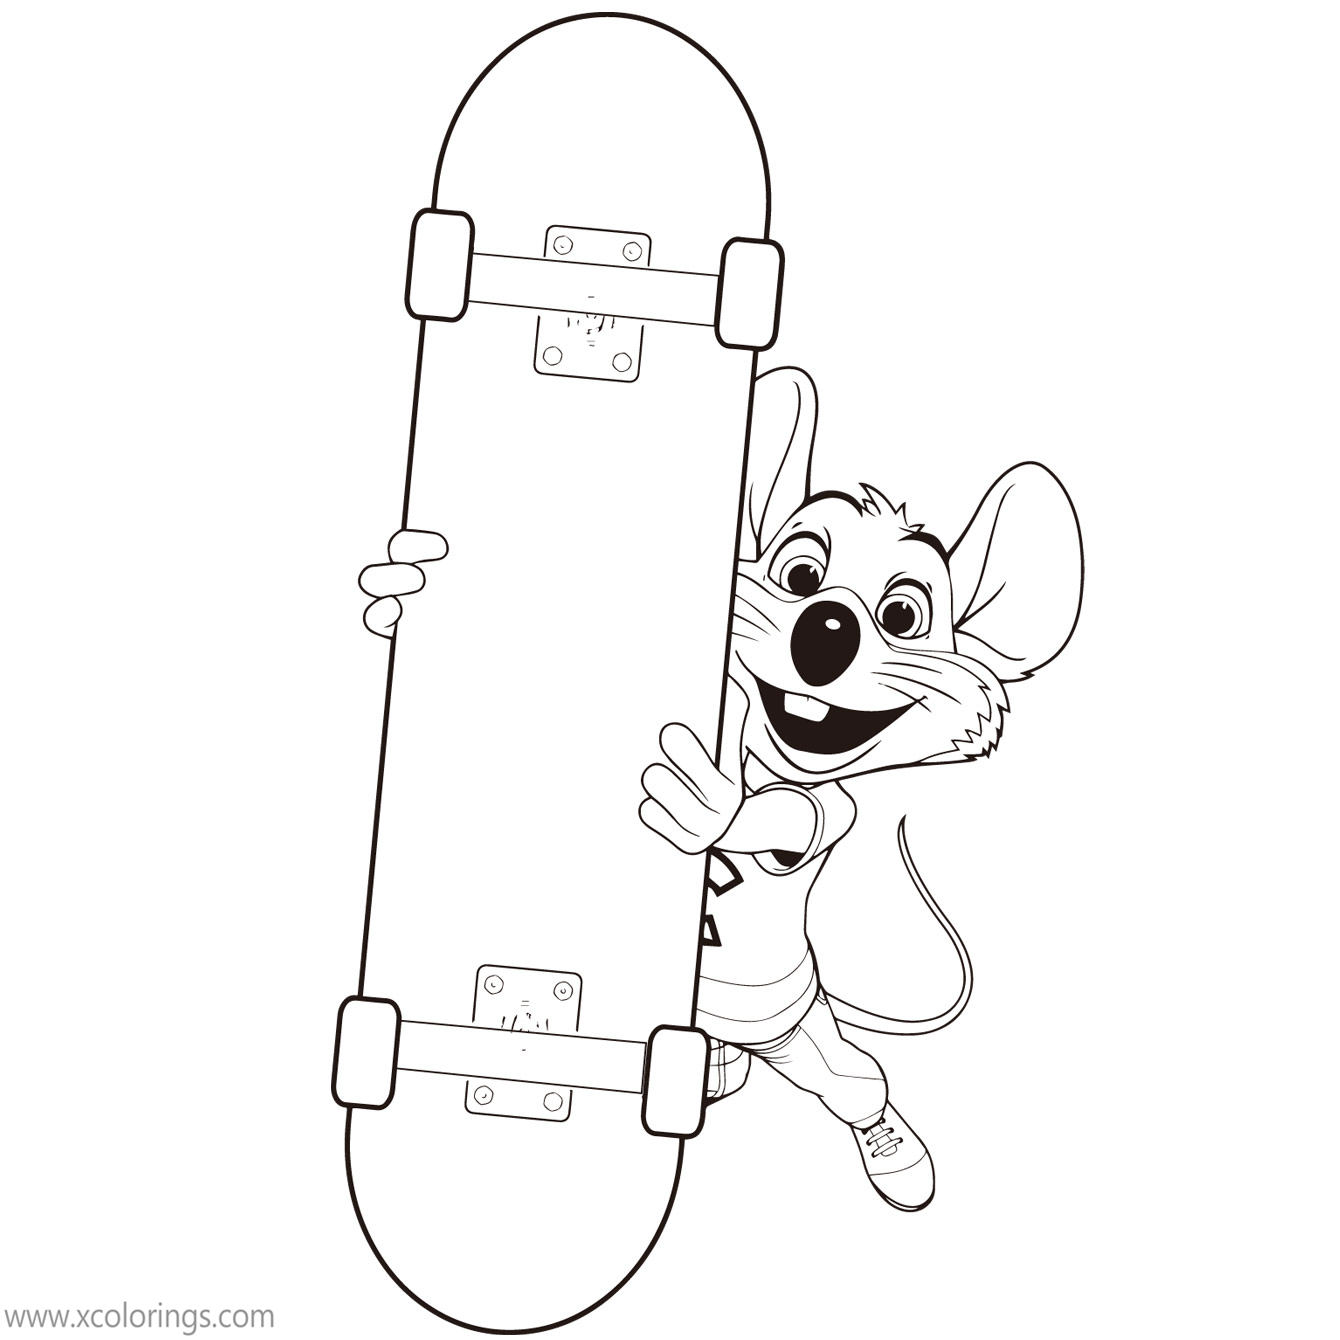 Free Chuck E Cheese Coloring Pages Skate printable